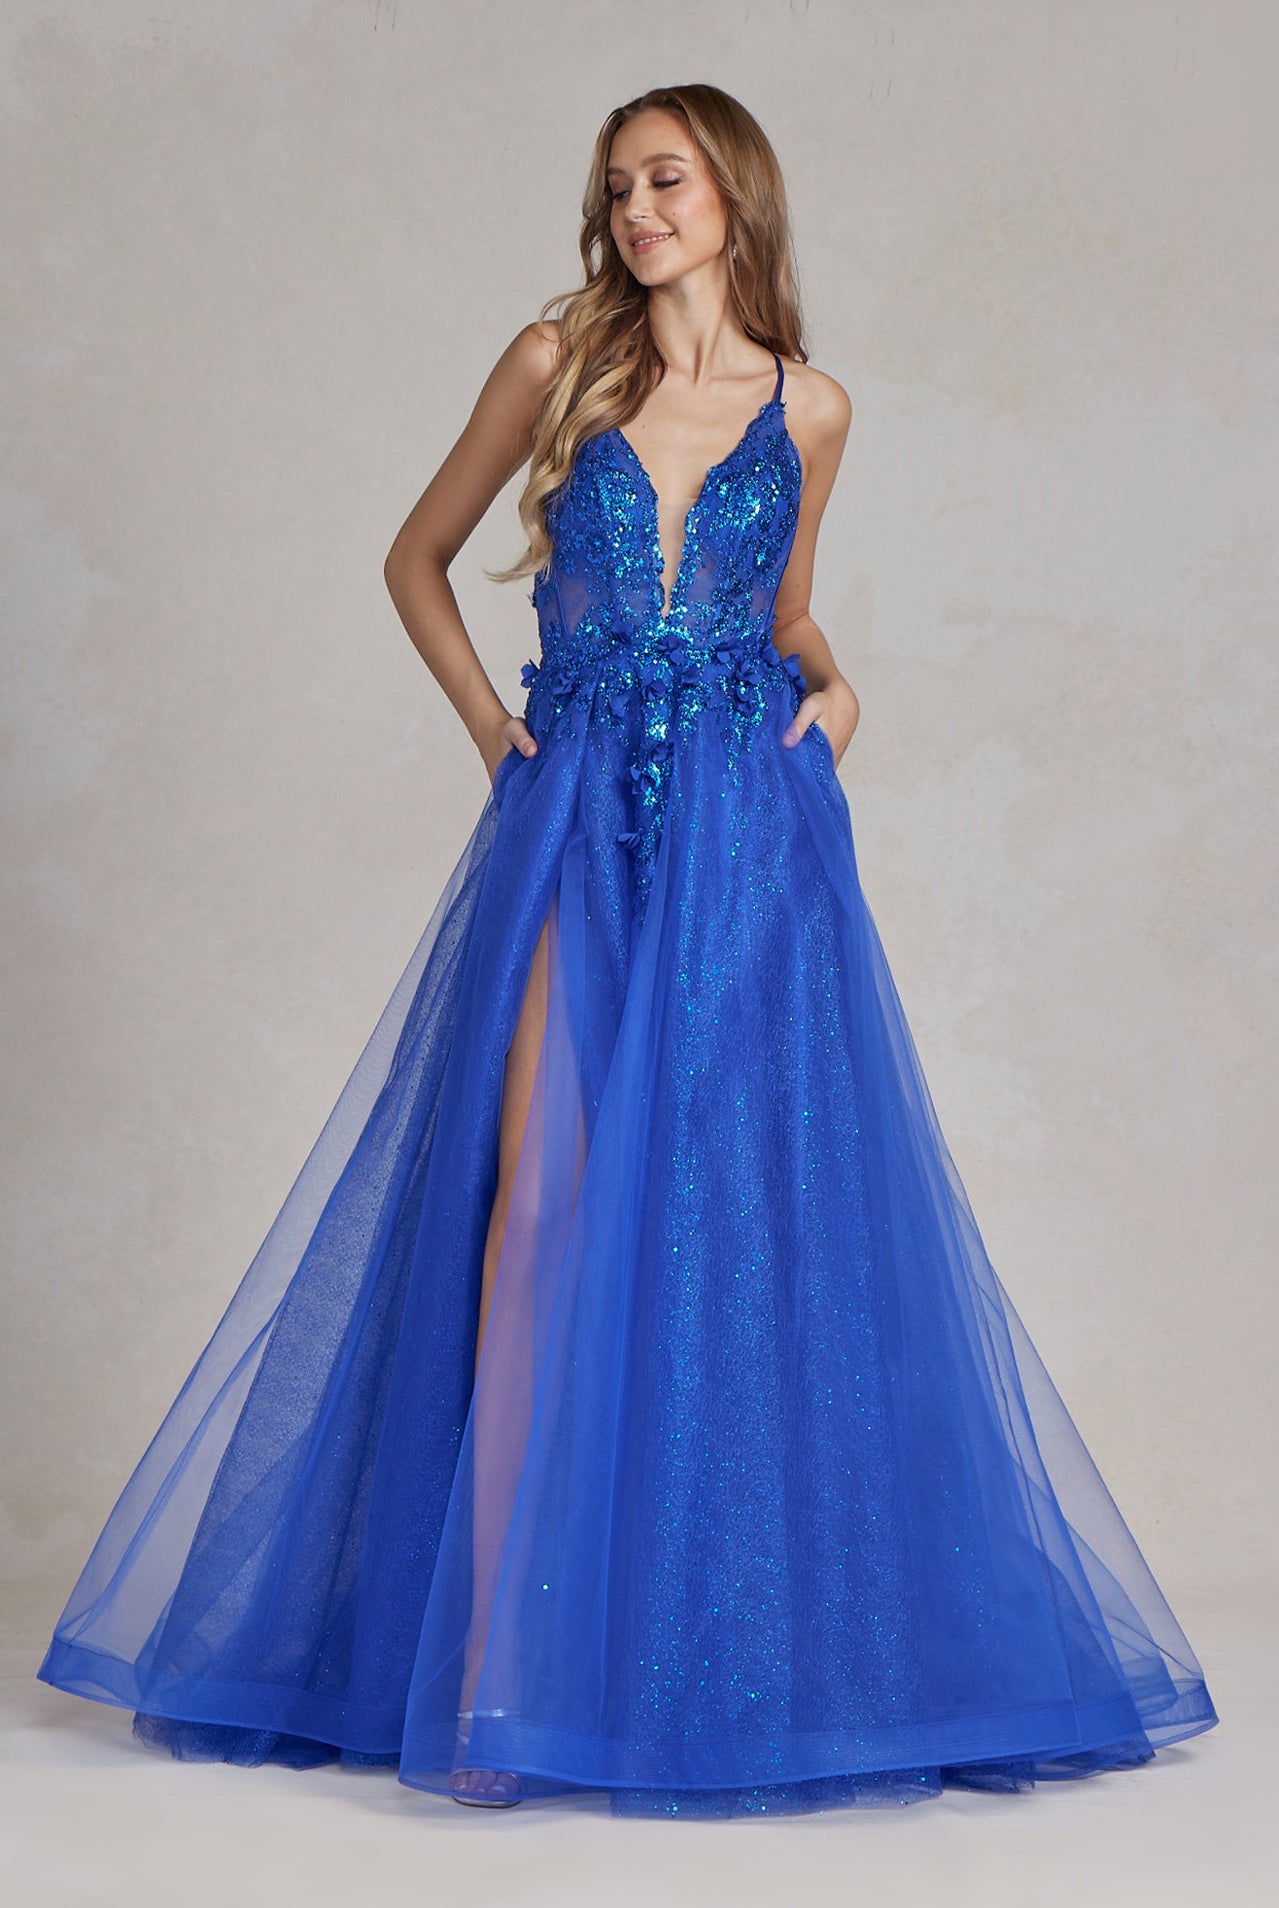 Tulle Skirt Embroidered Lace Open Criss Cross Back Long Prom Dress NXC1113-Prom Dress-smcfashion.com